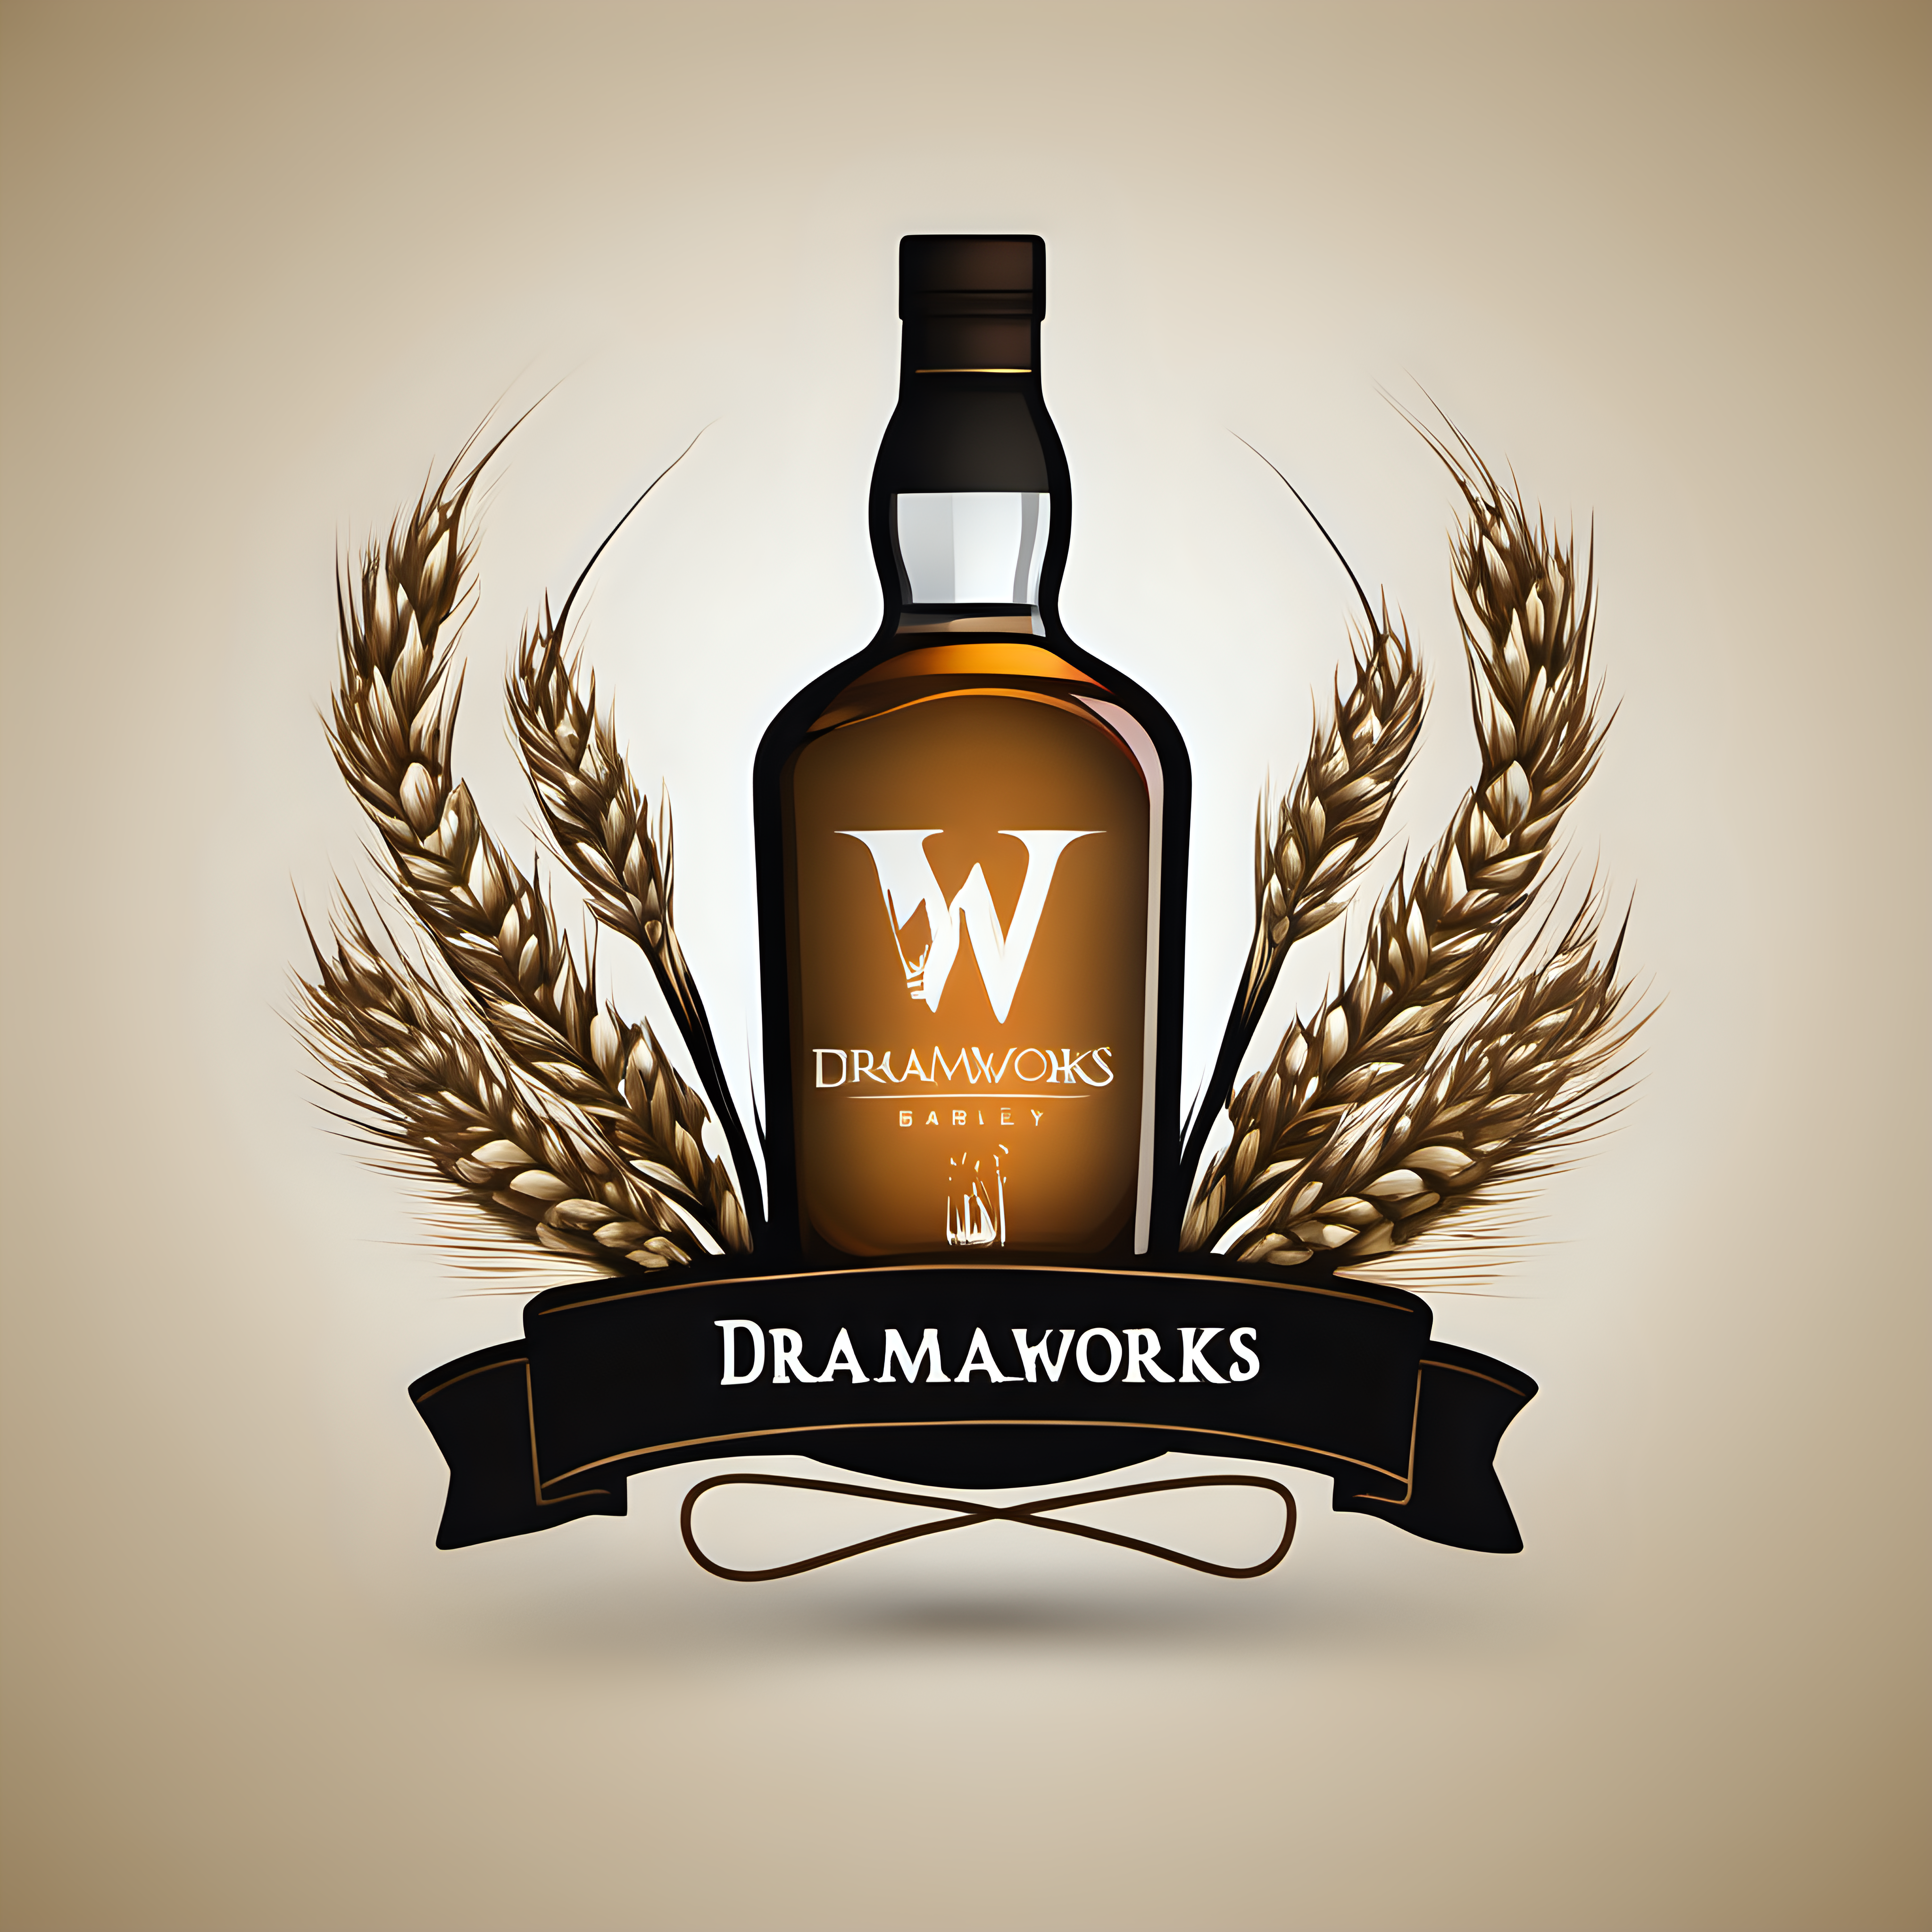 create a logo for "Dramworks" whisky brand using modern clean font  and features barley